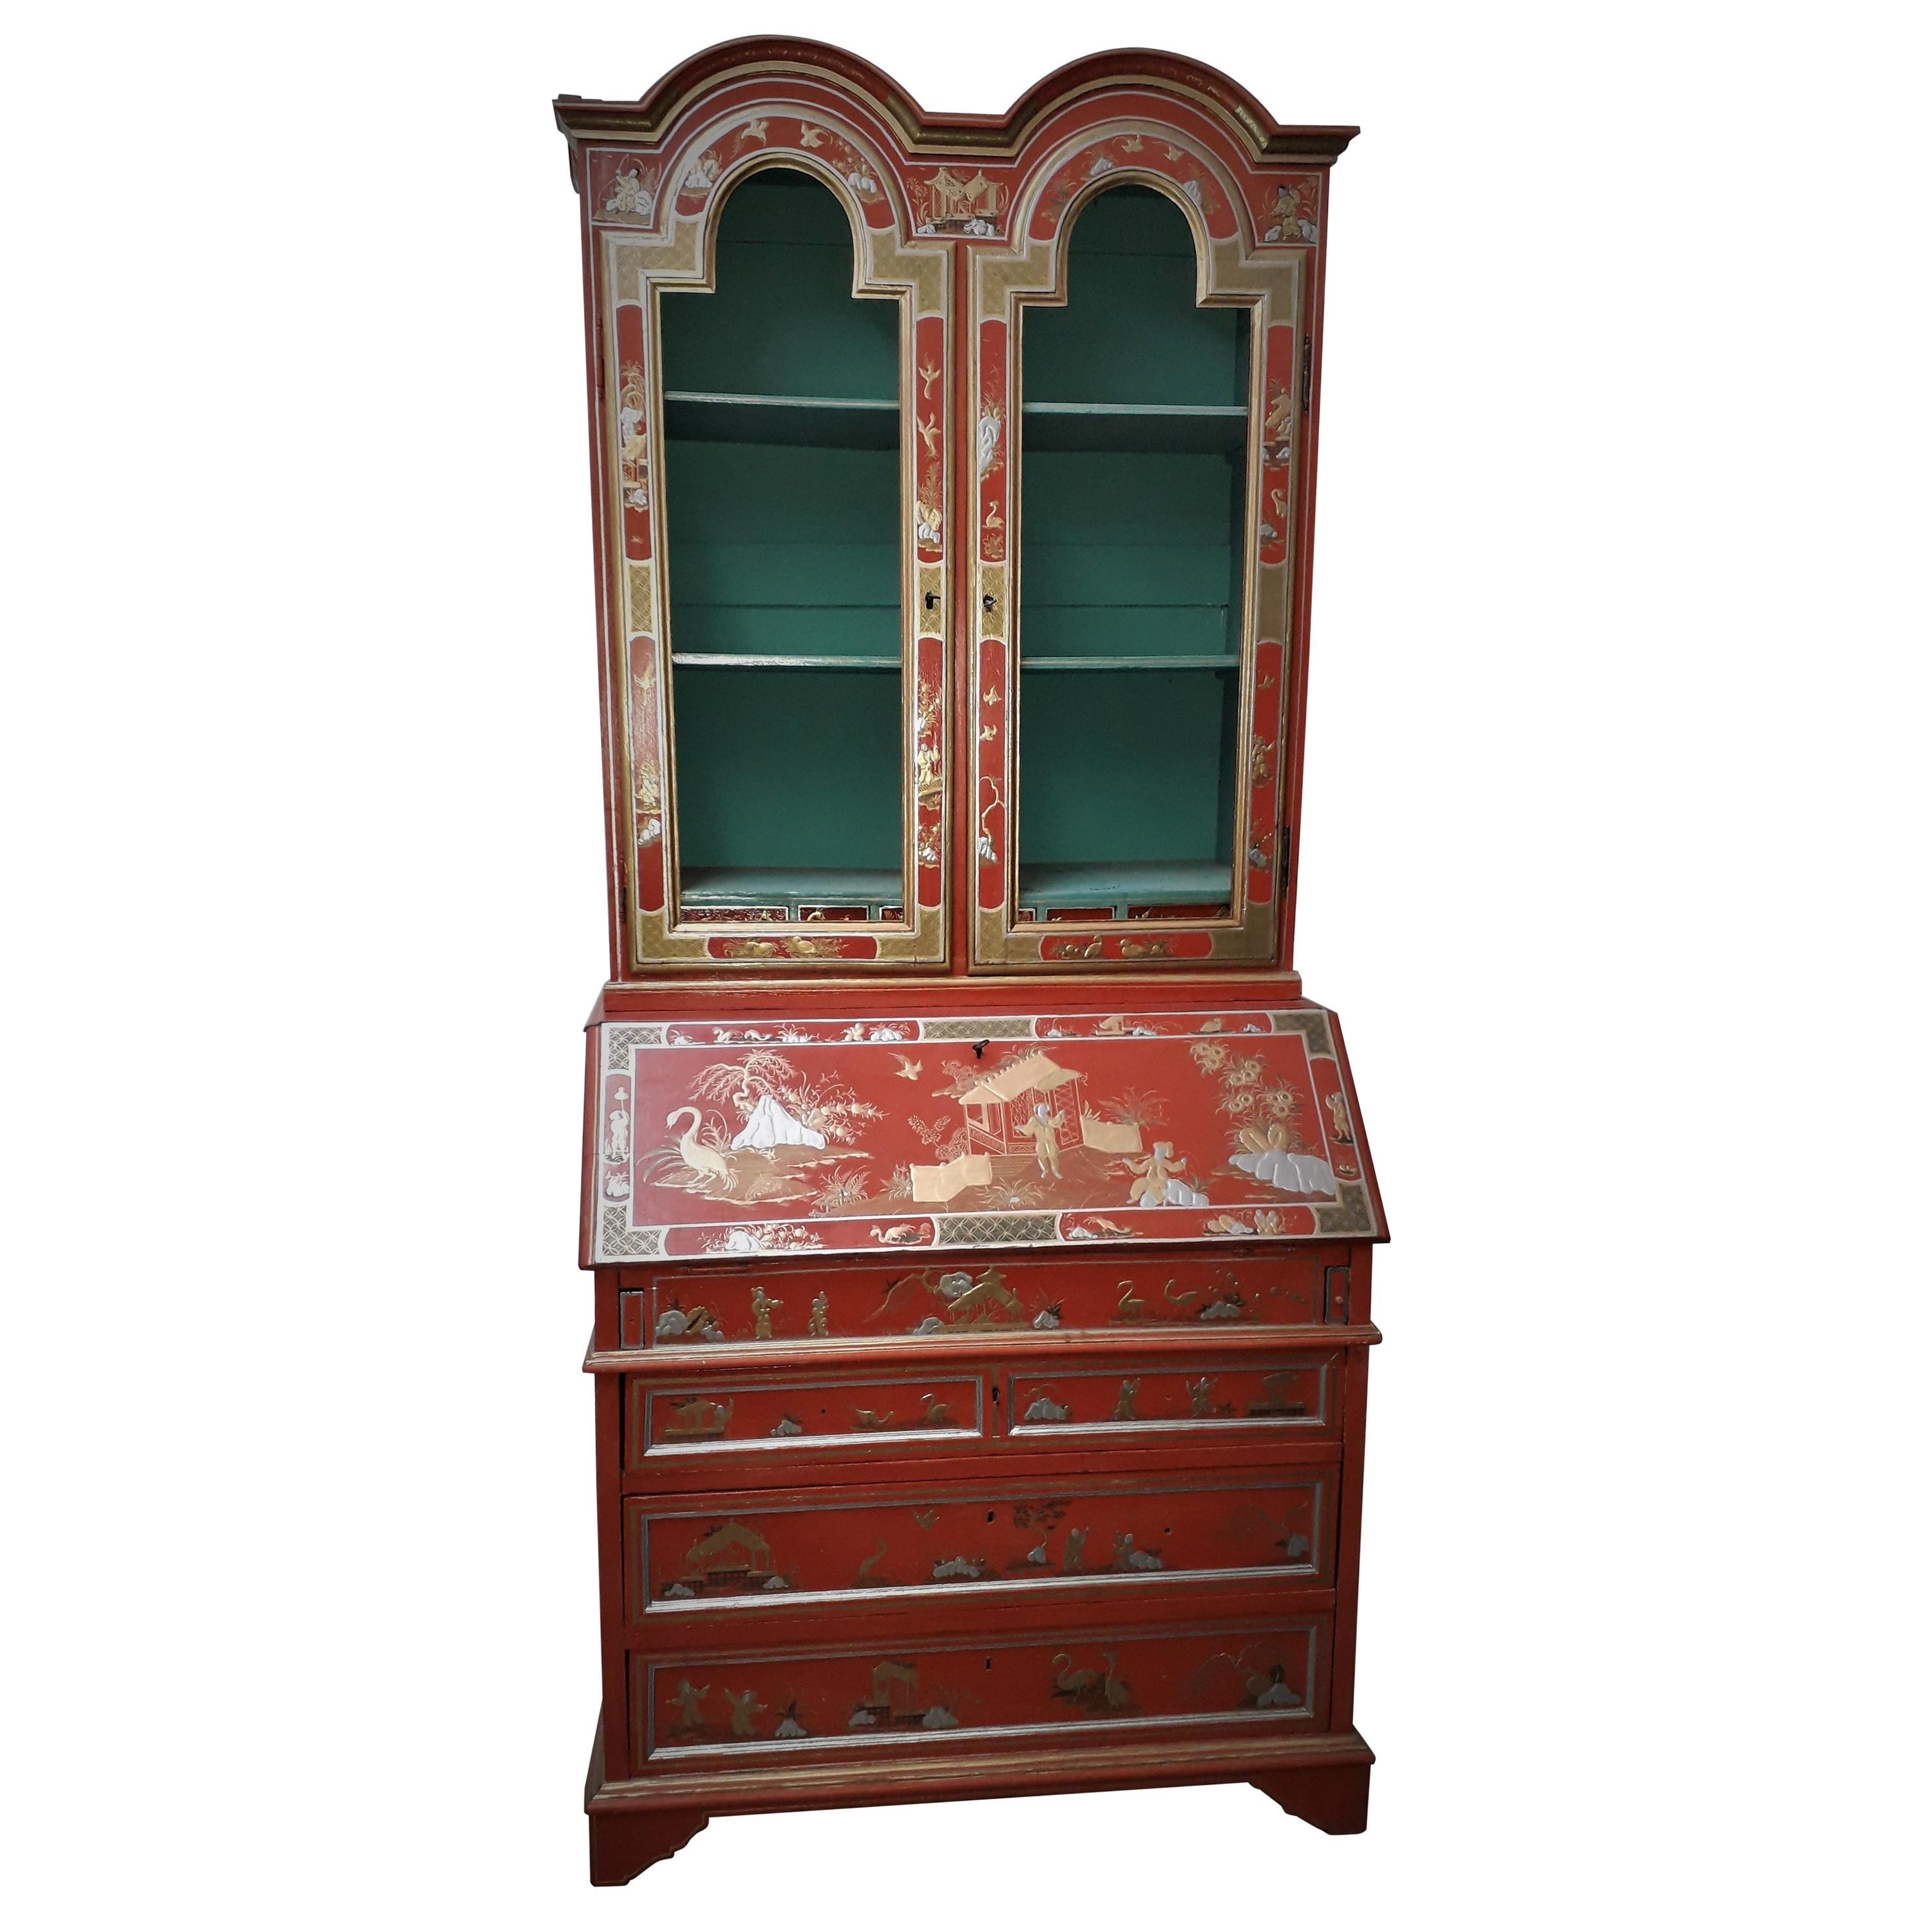 18th Century style Chinoiserie Red Lacquer Bureau Bookcase